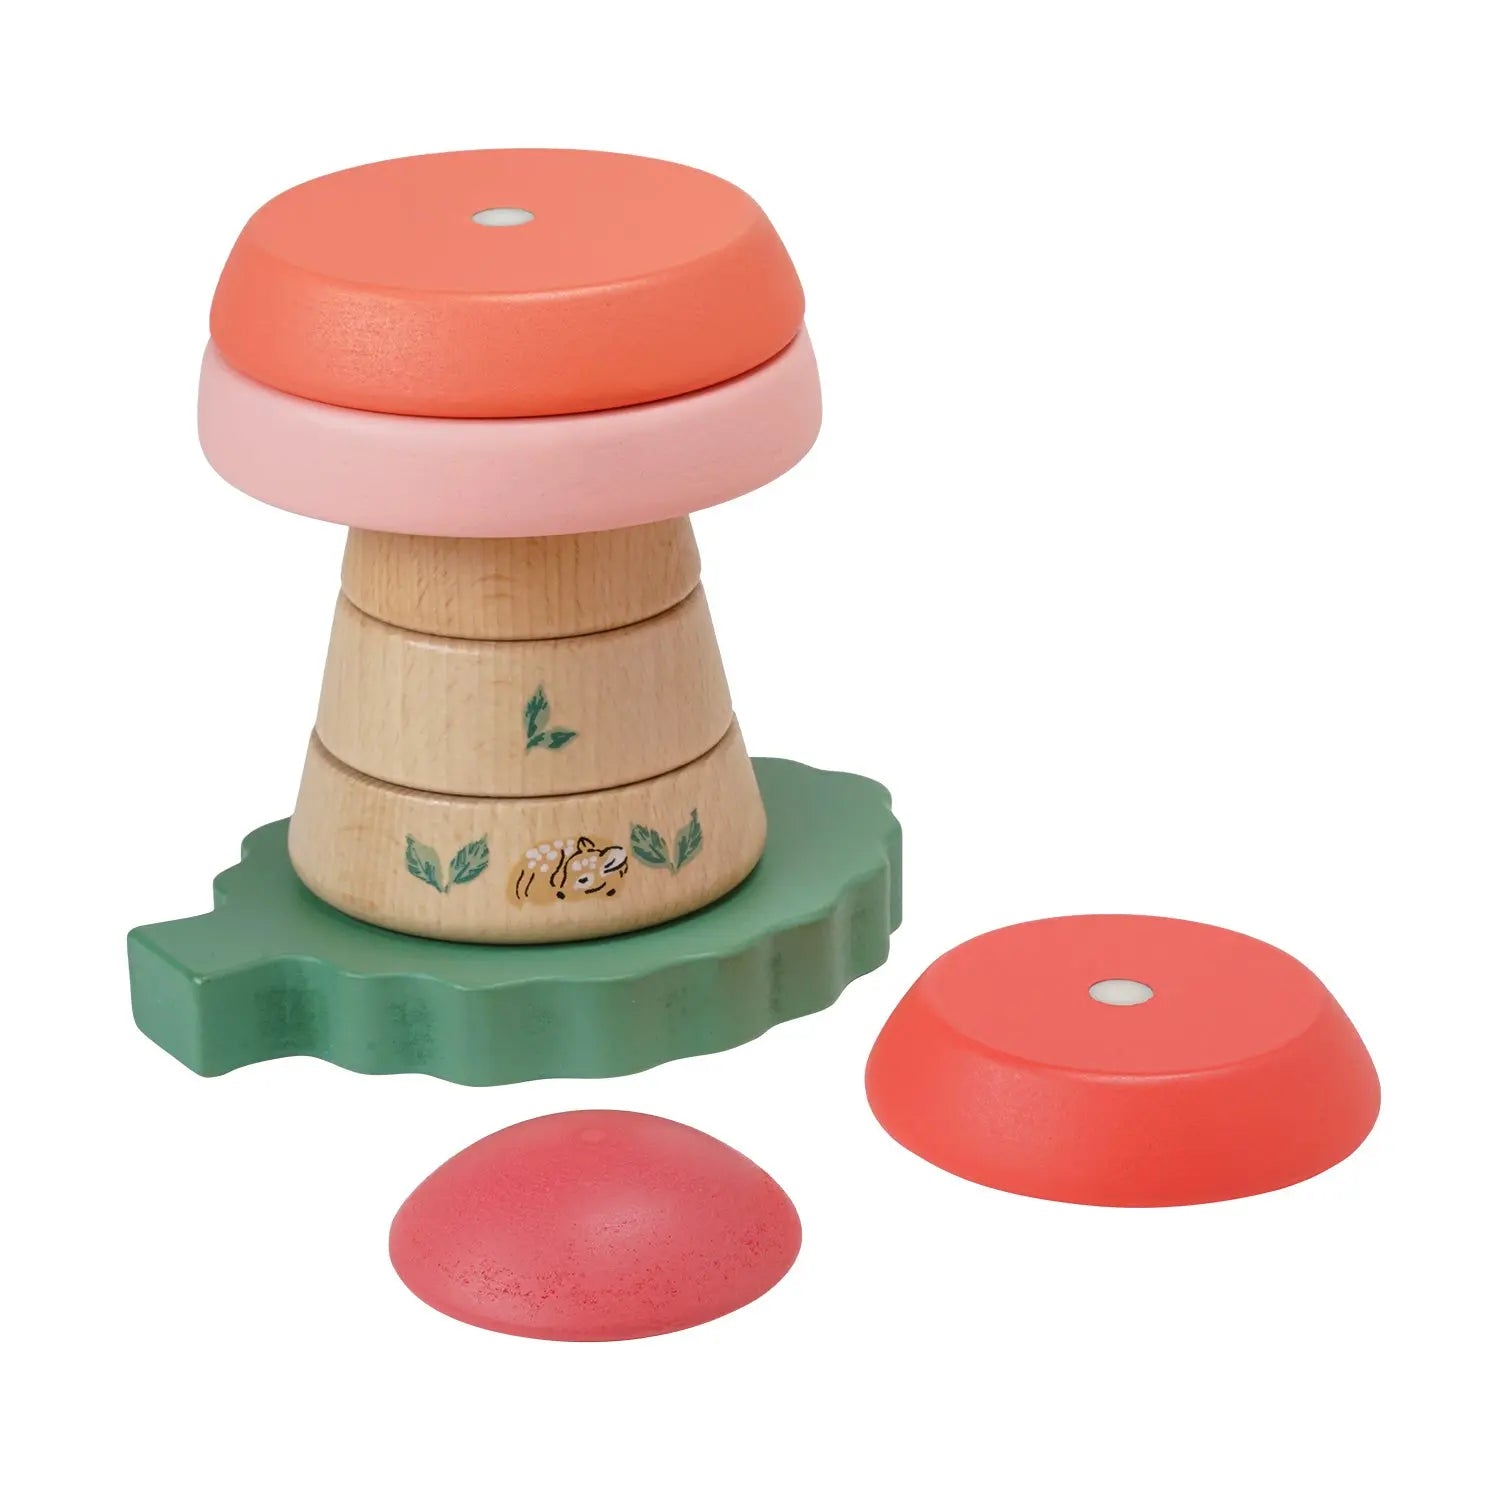 Manhattan Toy Folklore Fun-gi Magnetic Wooden Stacking Toy, -- ANB Baby